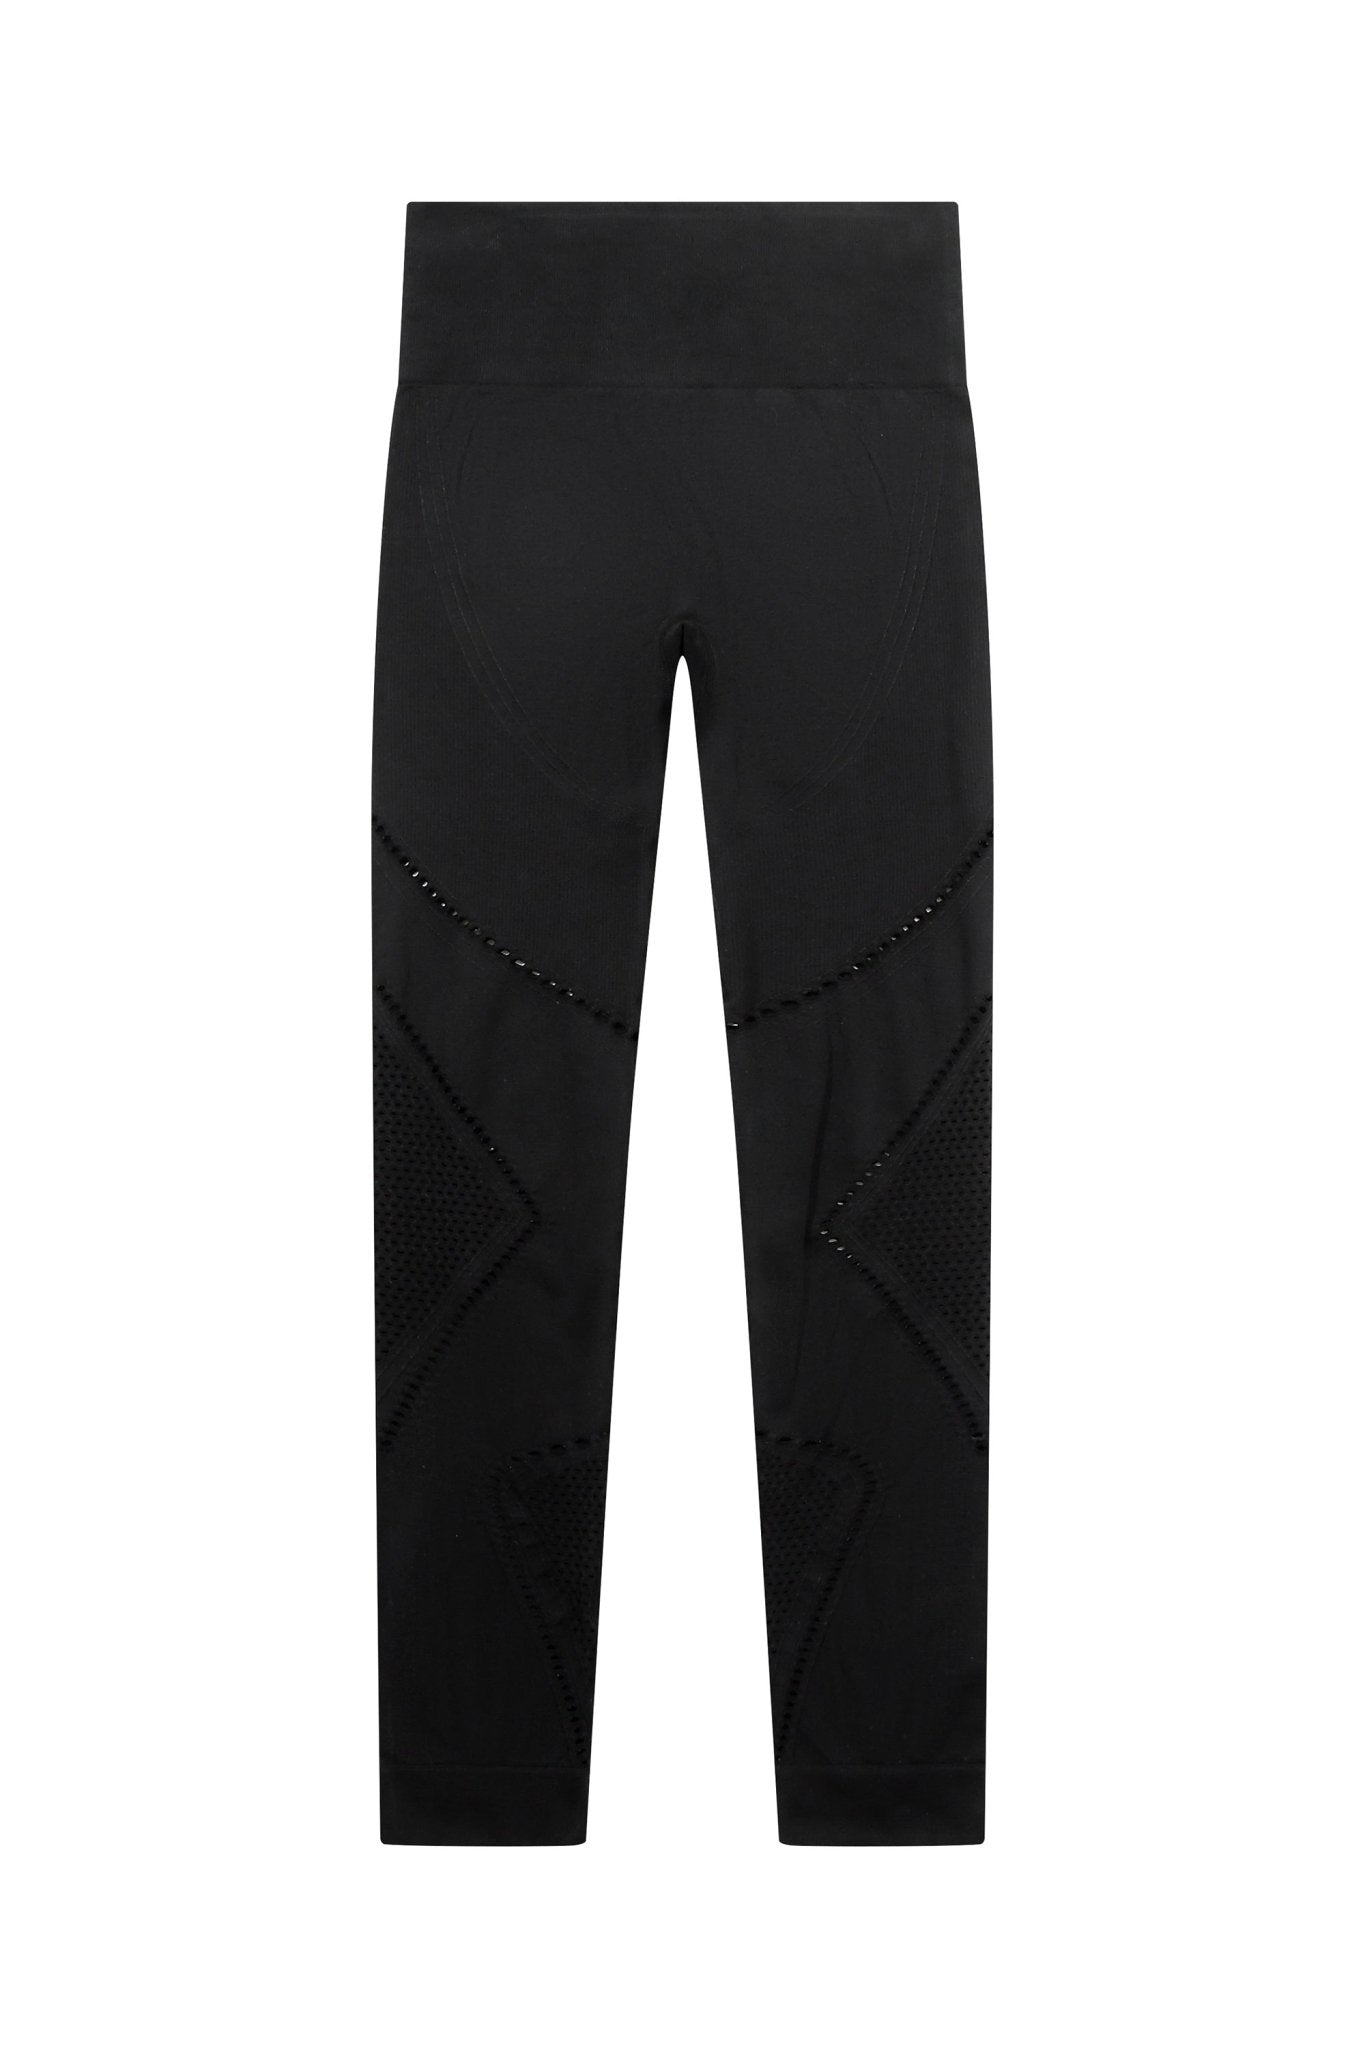 Seamless Open Stitch Legging - Magnlens